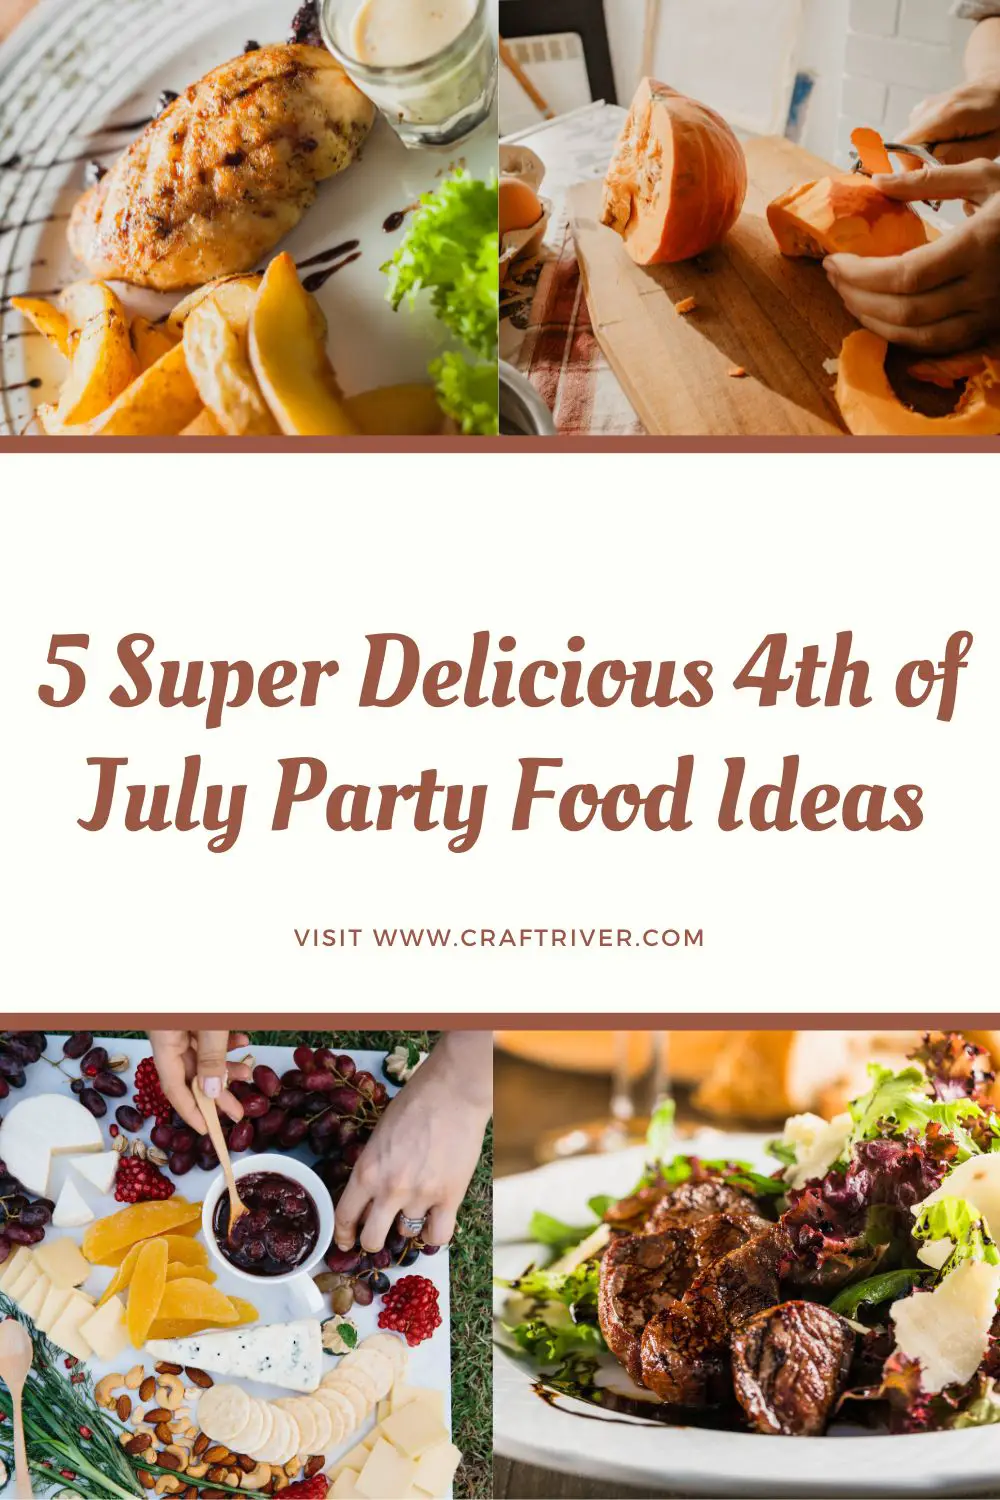 5 Super Delicious 4th of July Party Food Ideas